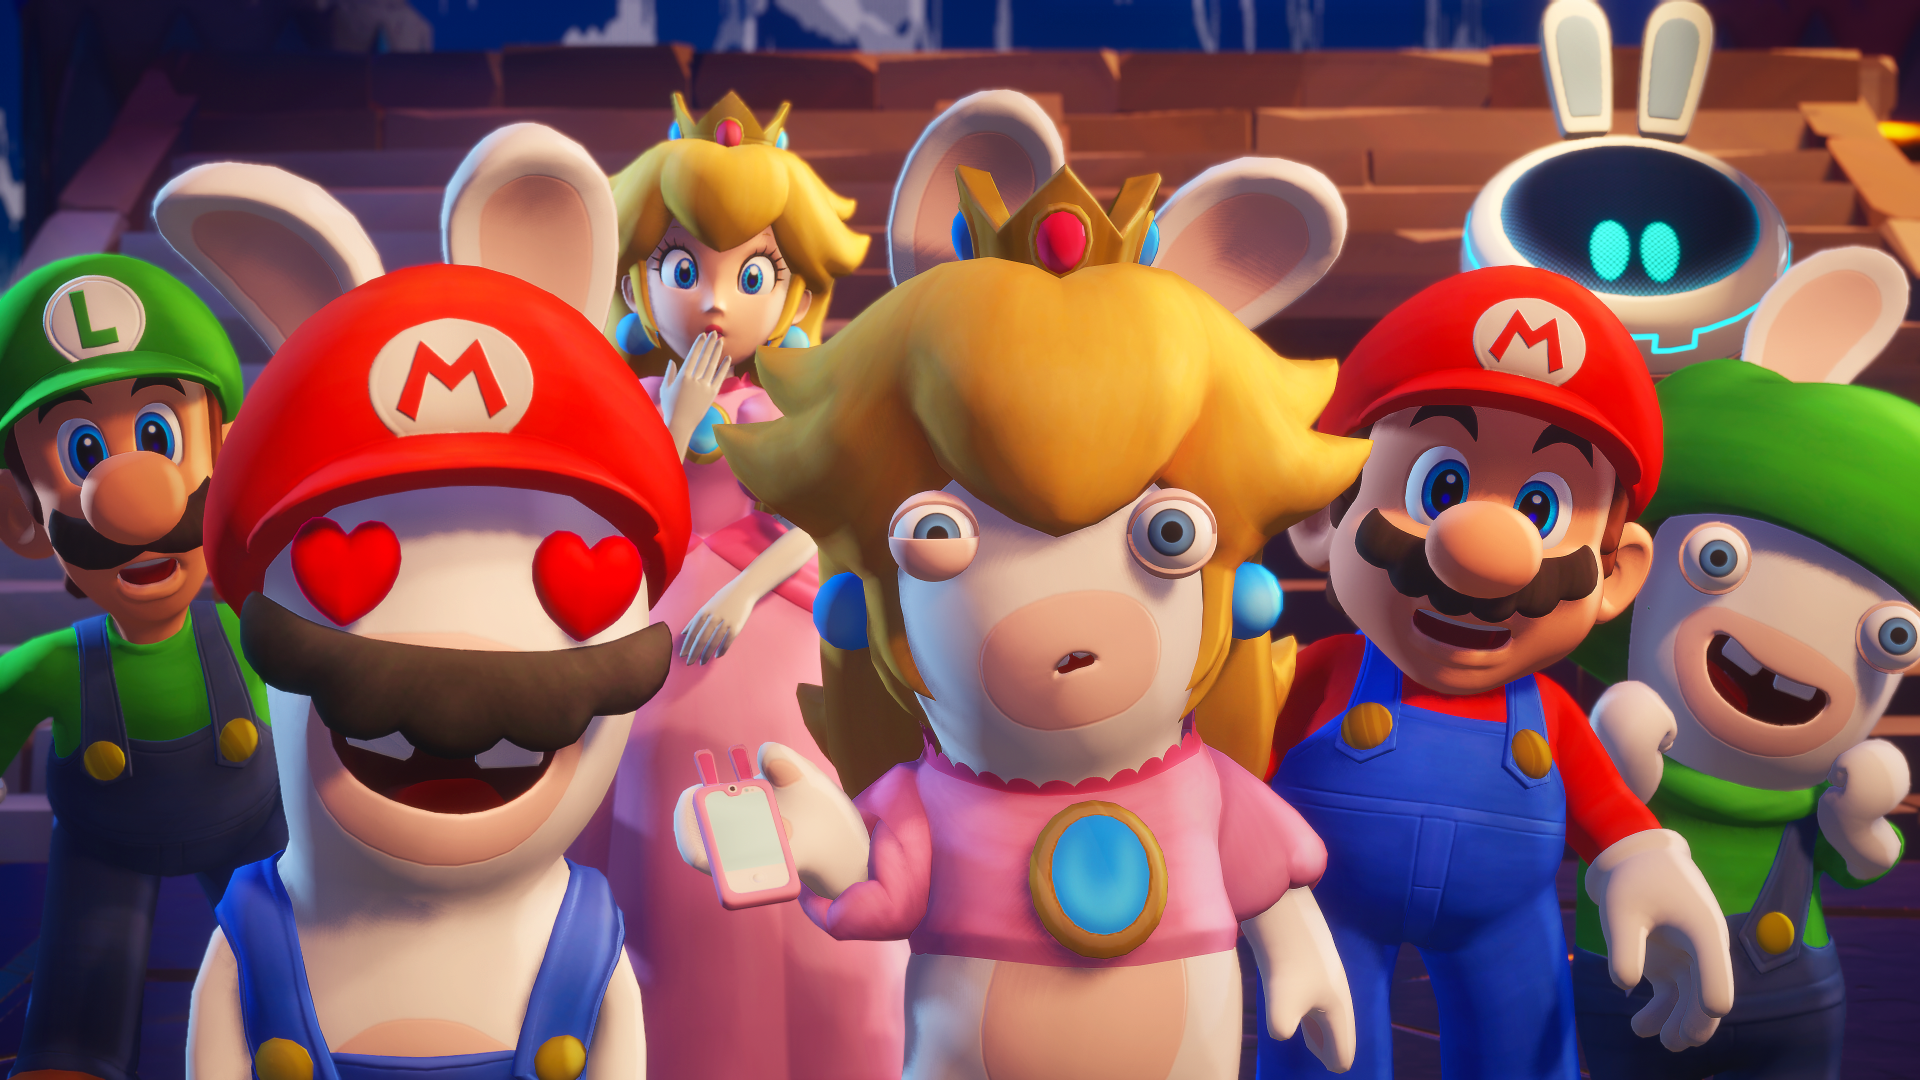 Probably Mario + Rabbids Sparks of Hope will be released on October 20